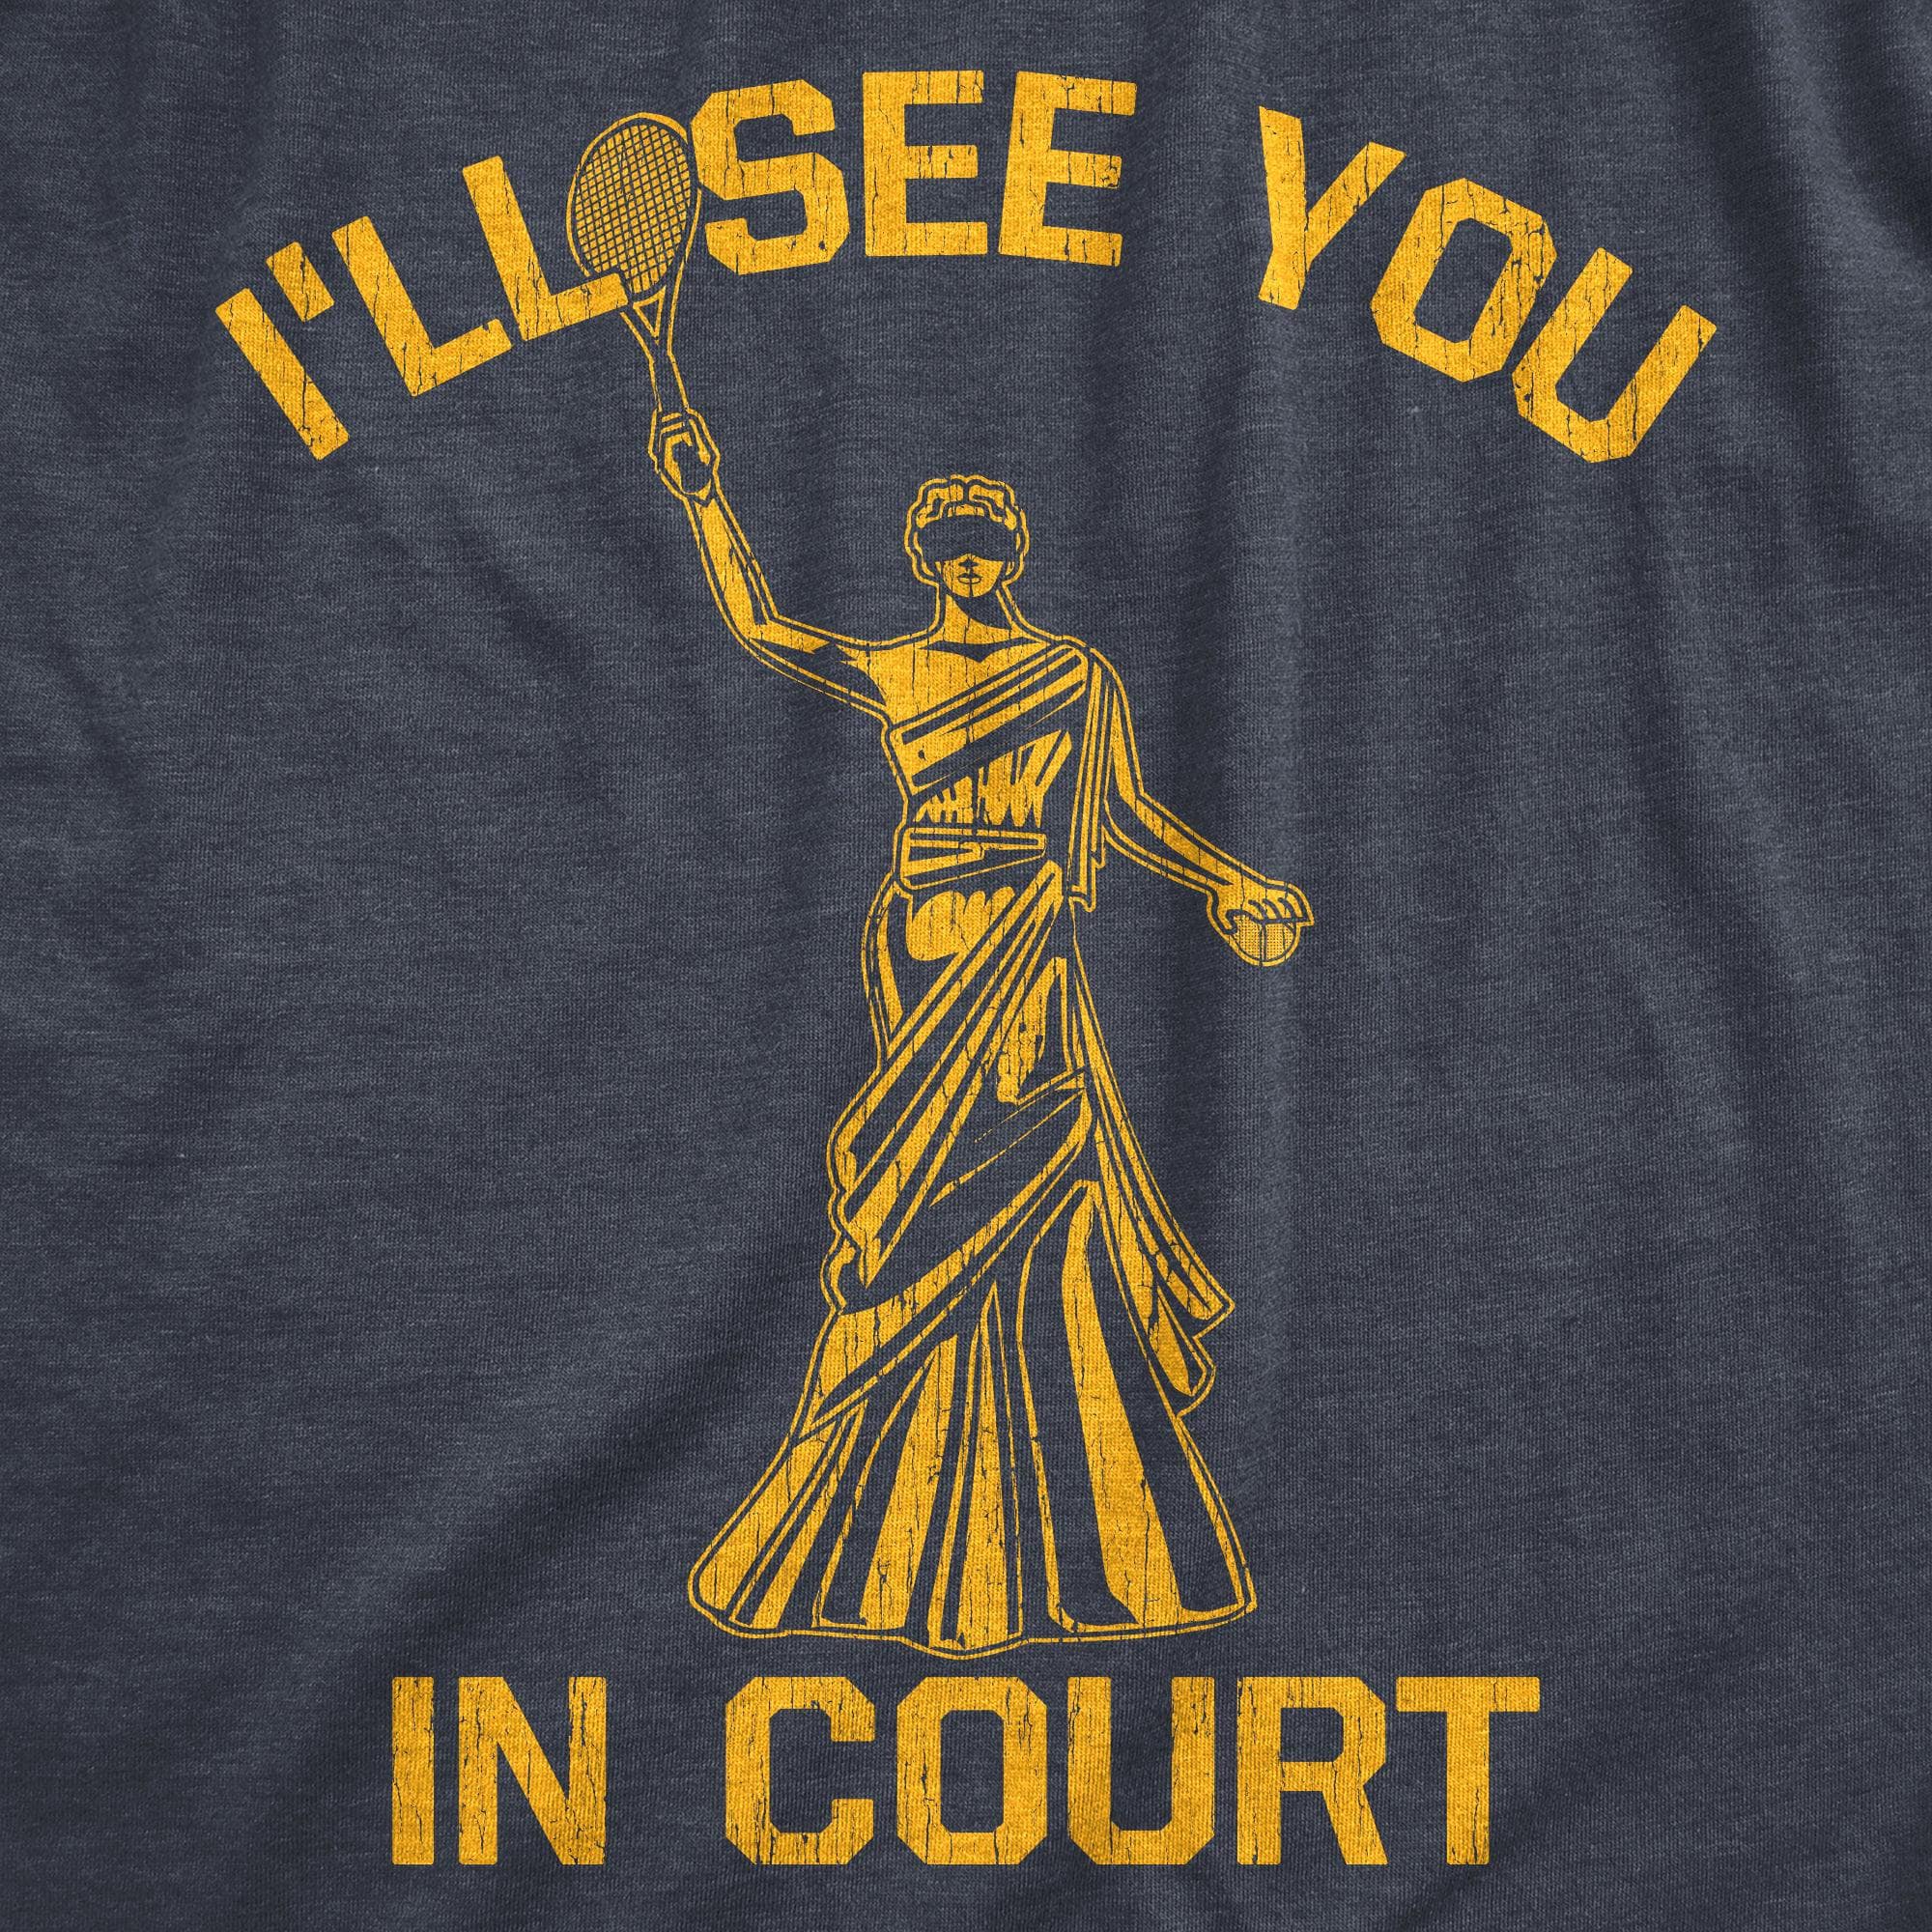 Ill See You In Court Men's Tshirt  -  Crazy Dog T-Shirts